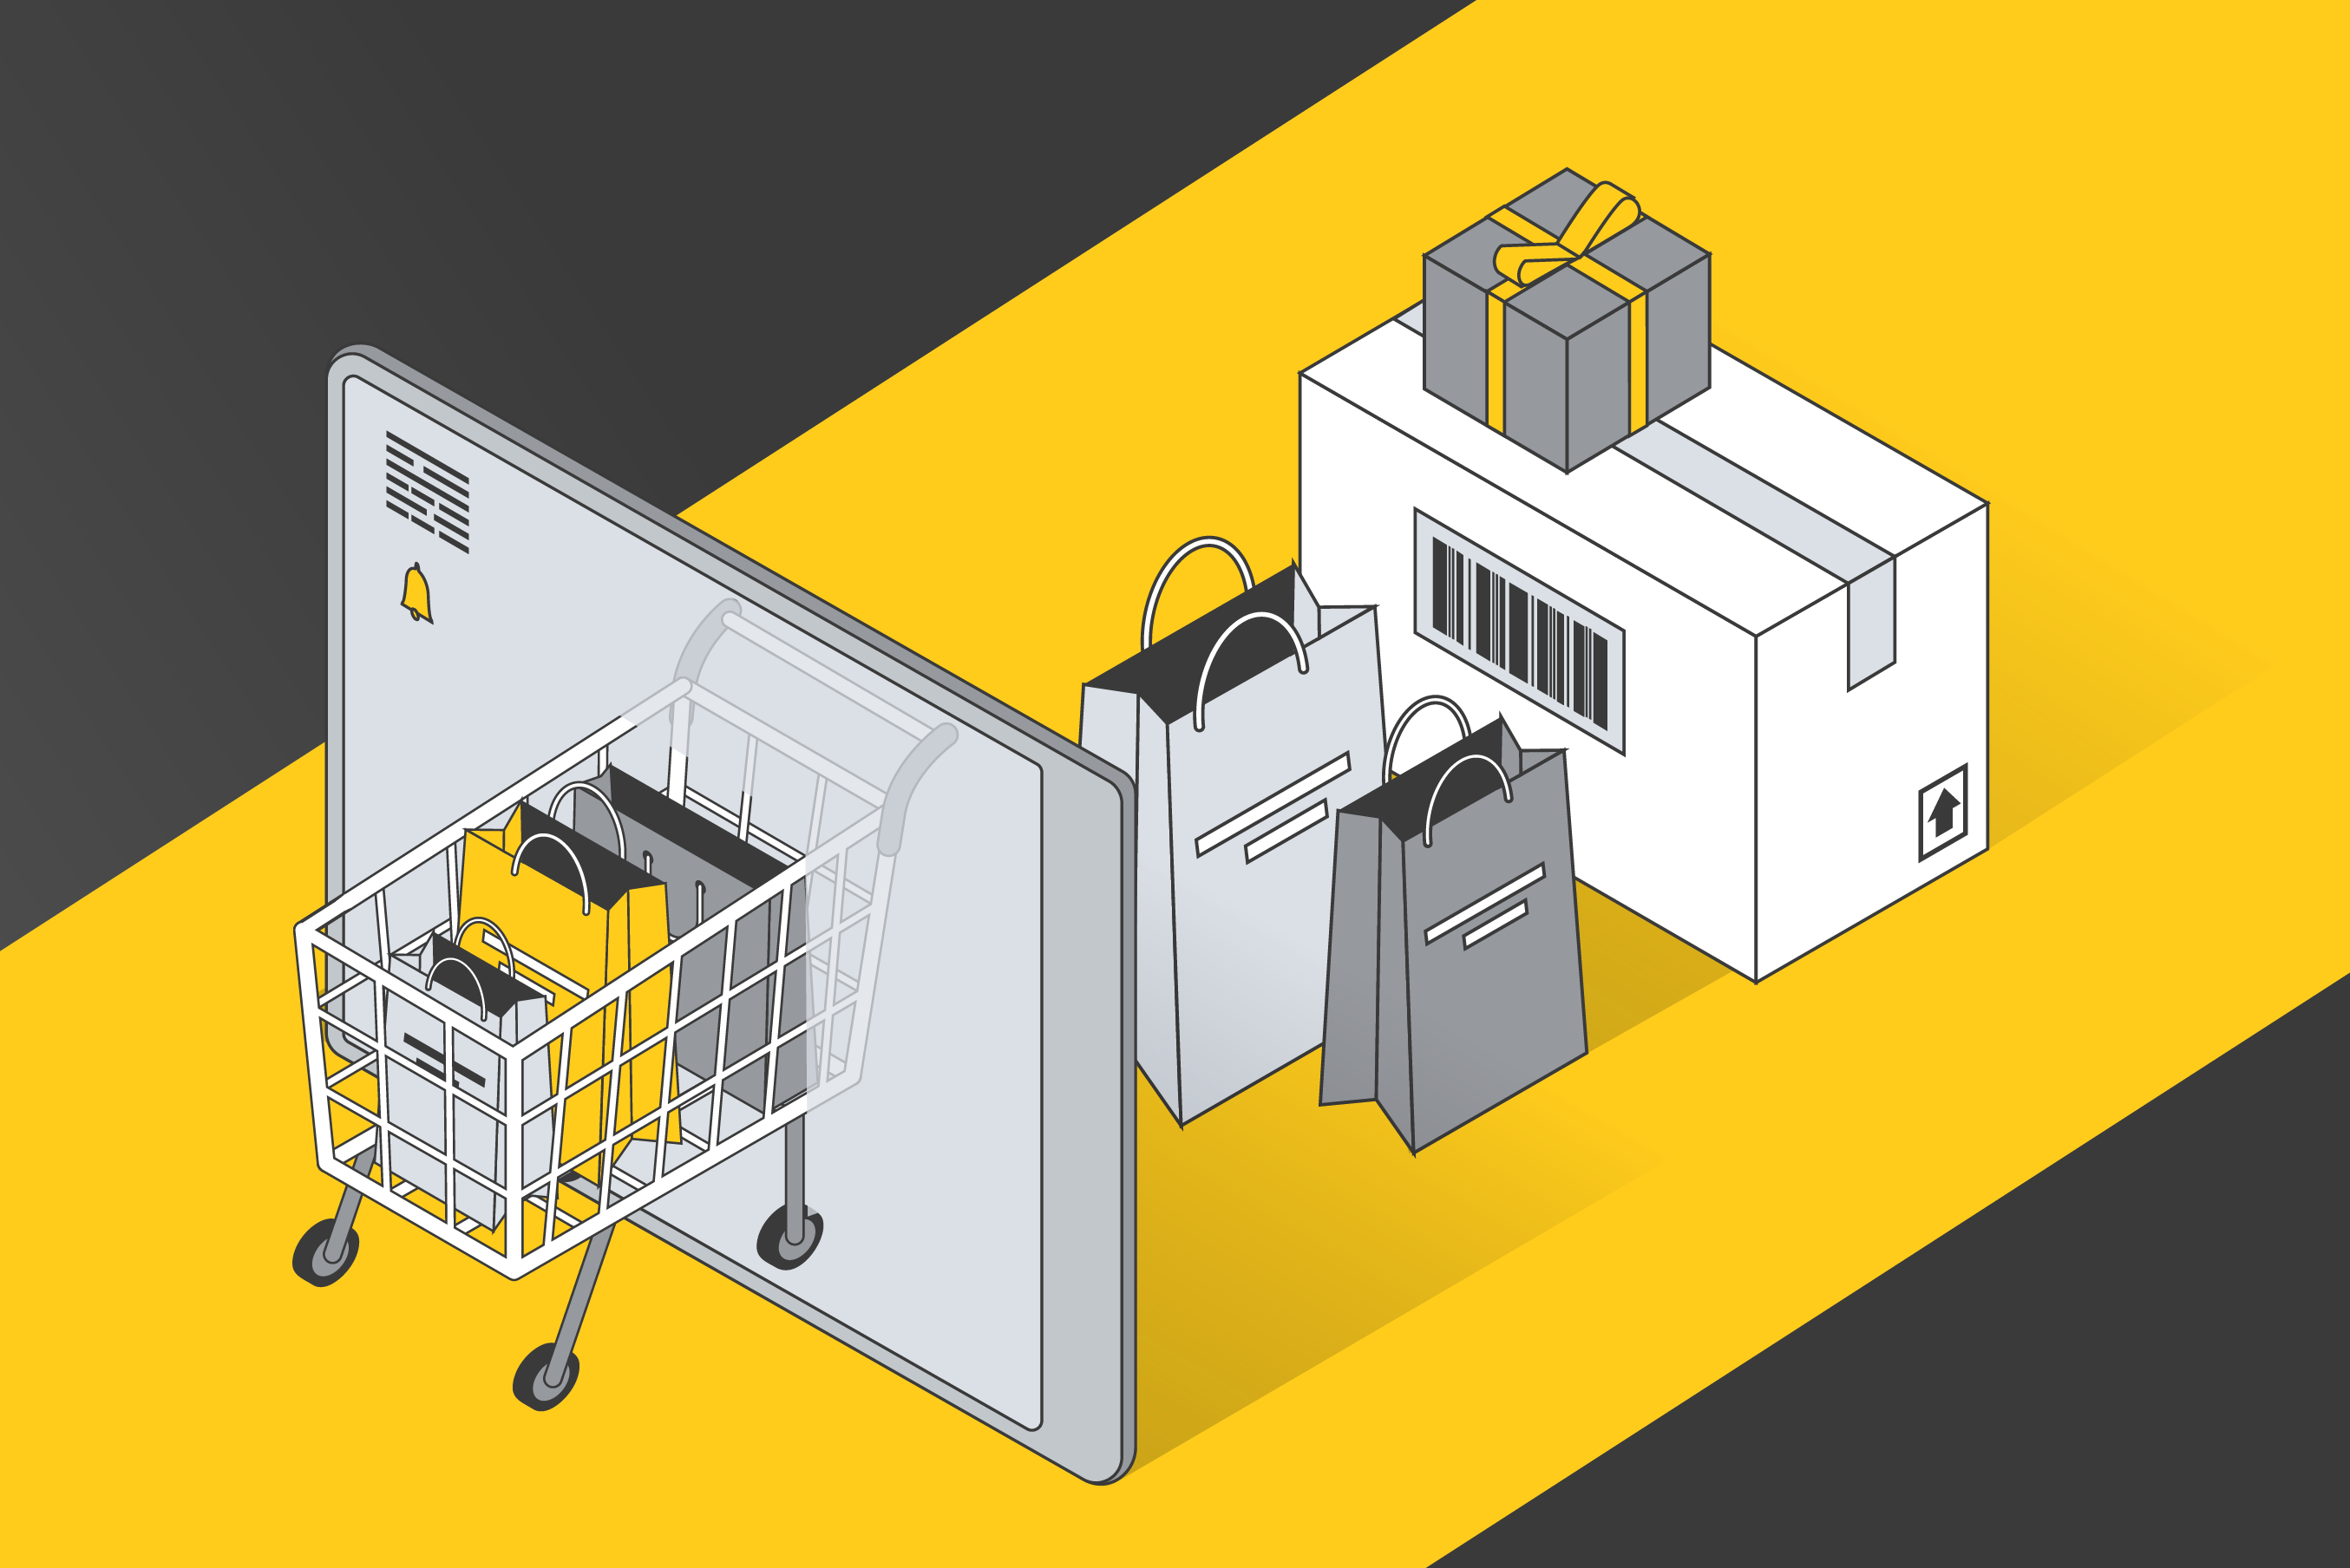 Isometric illustration of a shopping cart filled with bags exiting a computer screen, symbolizing online shopping, with packages and shopping bags nearby on a yellow and gray background, highlighting the concept of Retail Media Networks